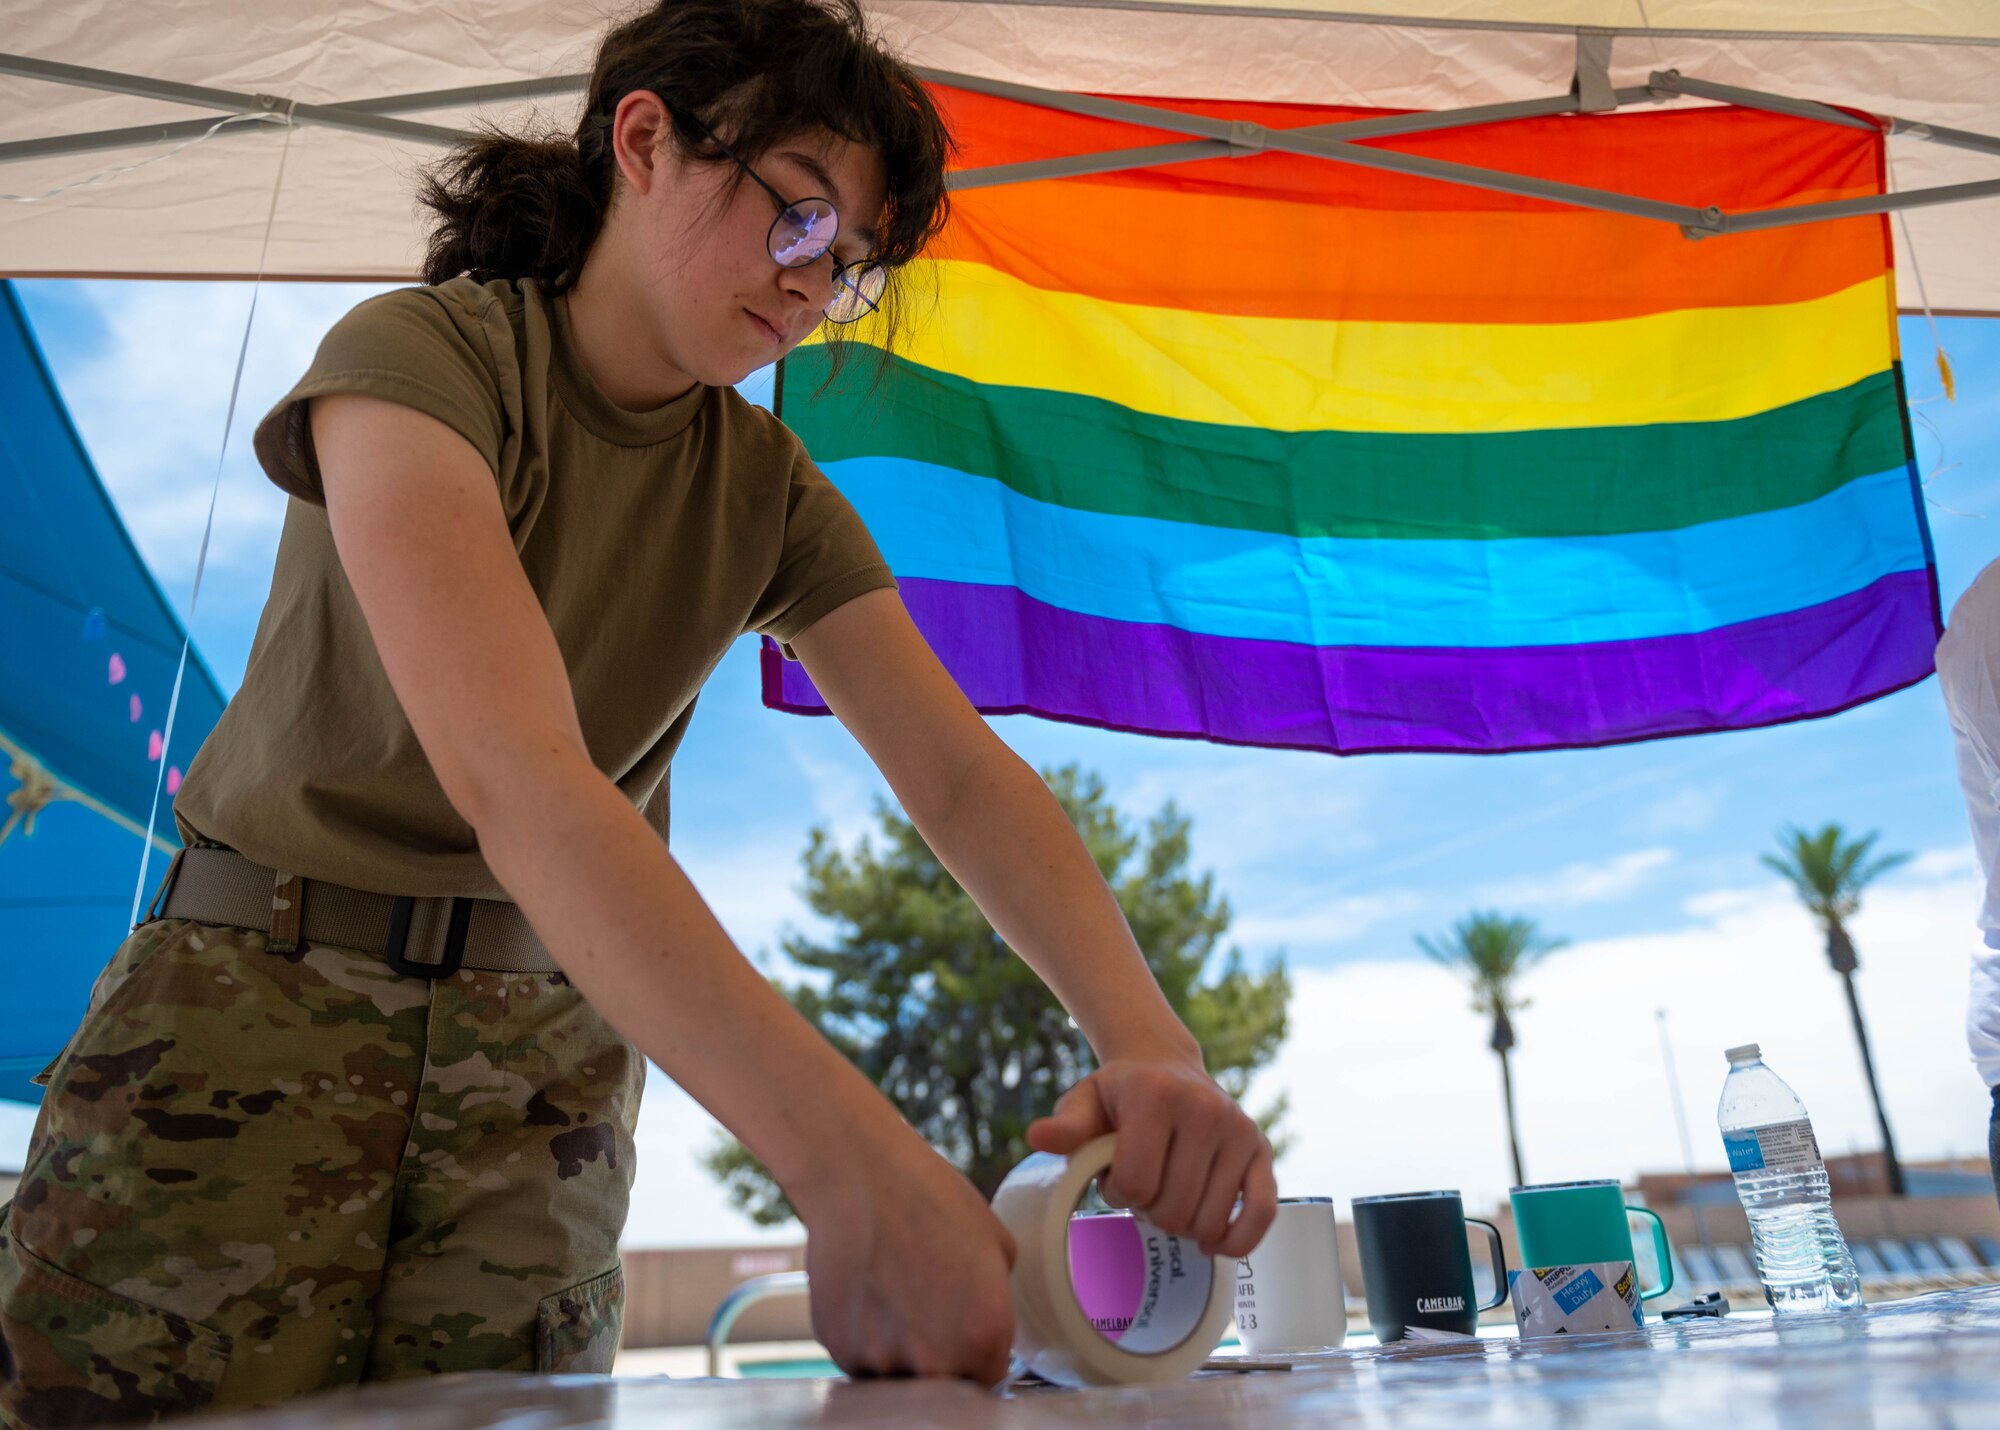 U.S. Air Force Airman 1st Class Ysabella Paris, 56th Comptroller Maintenance fuel maintenance technician, participates in a cardboard boat race event in honor of Pride Month, June 9, 2023, at Luke Air Force Base, Arizona.